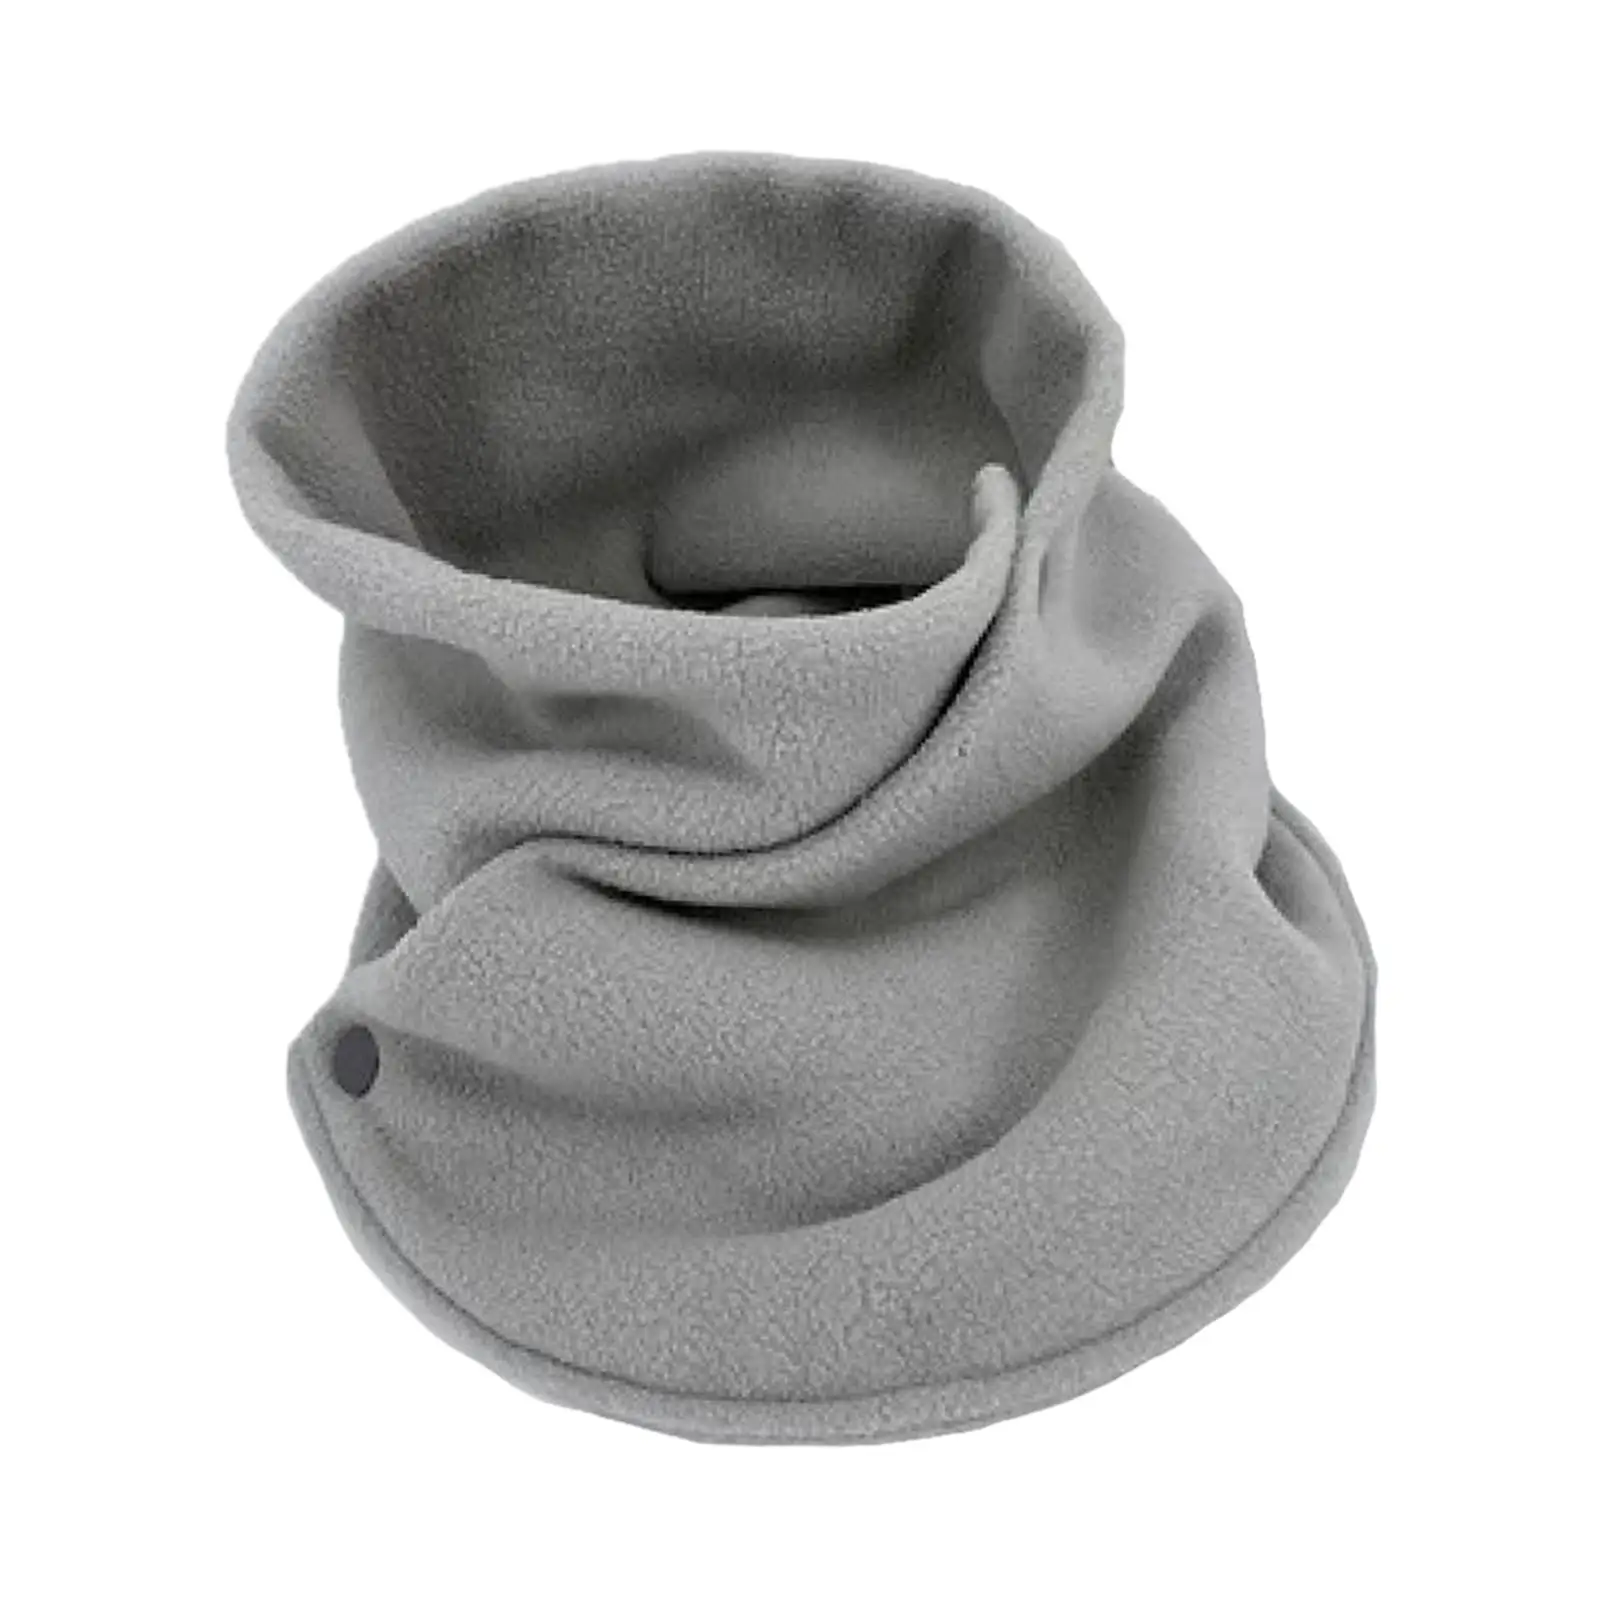 Winter Neck Gaiter Multipurpose for Women Thermal Neck Warmer for Outdoor Sports Skiing Cold Weather Snowboarding Motorcycling